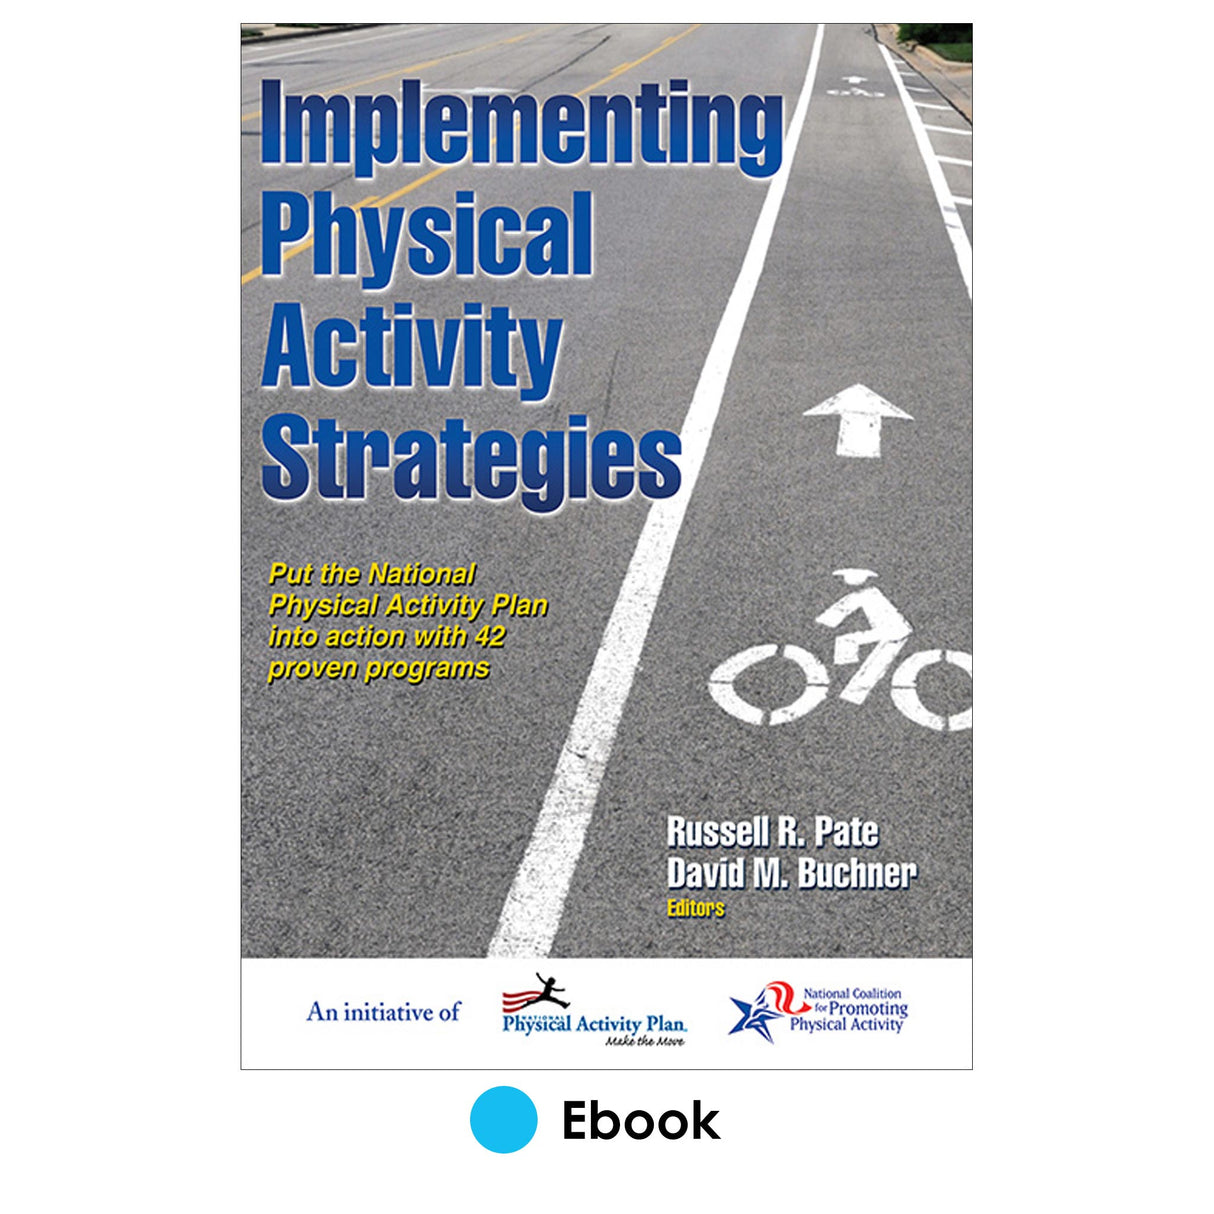 Implementing Physical Activity Strategies PDF